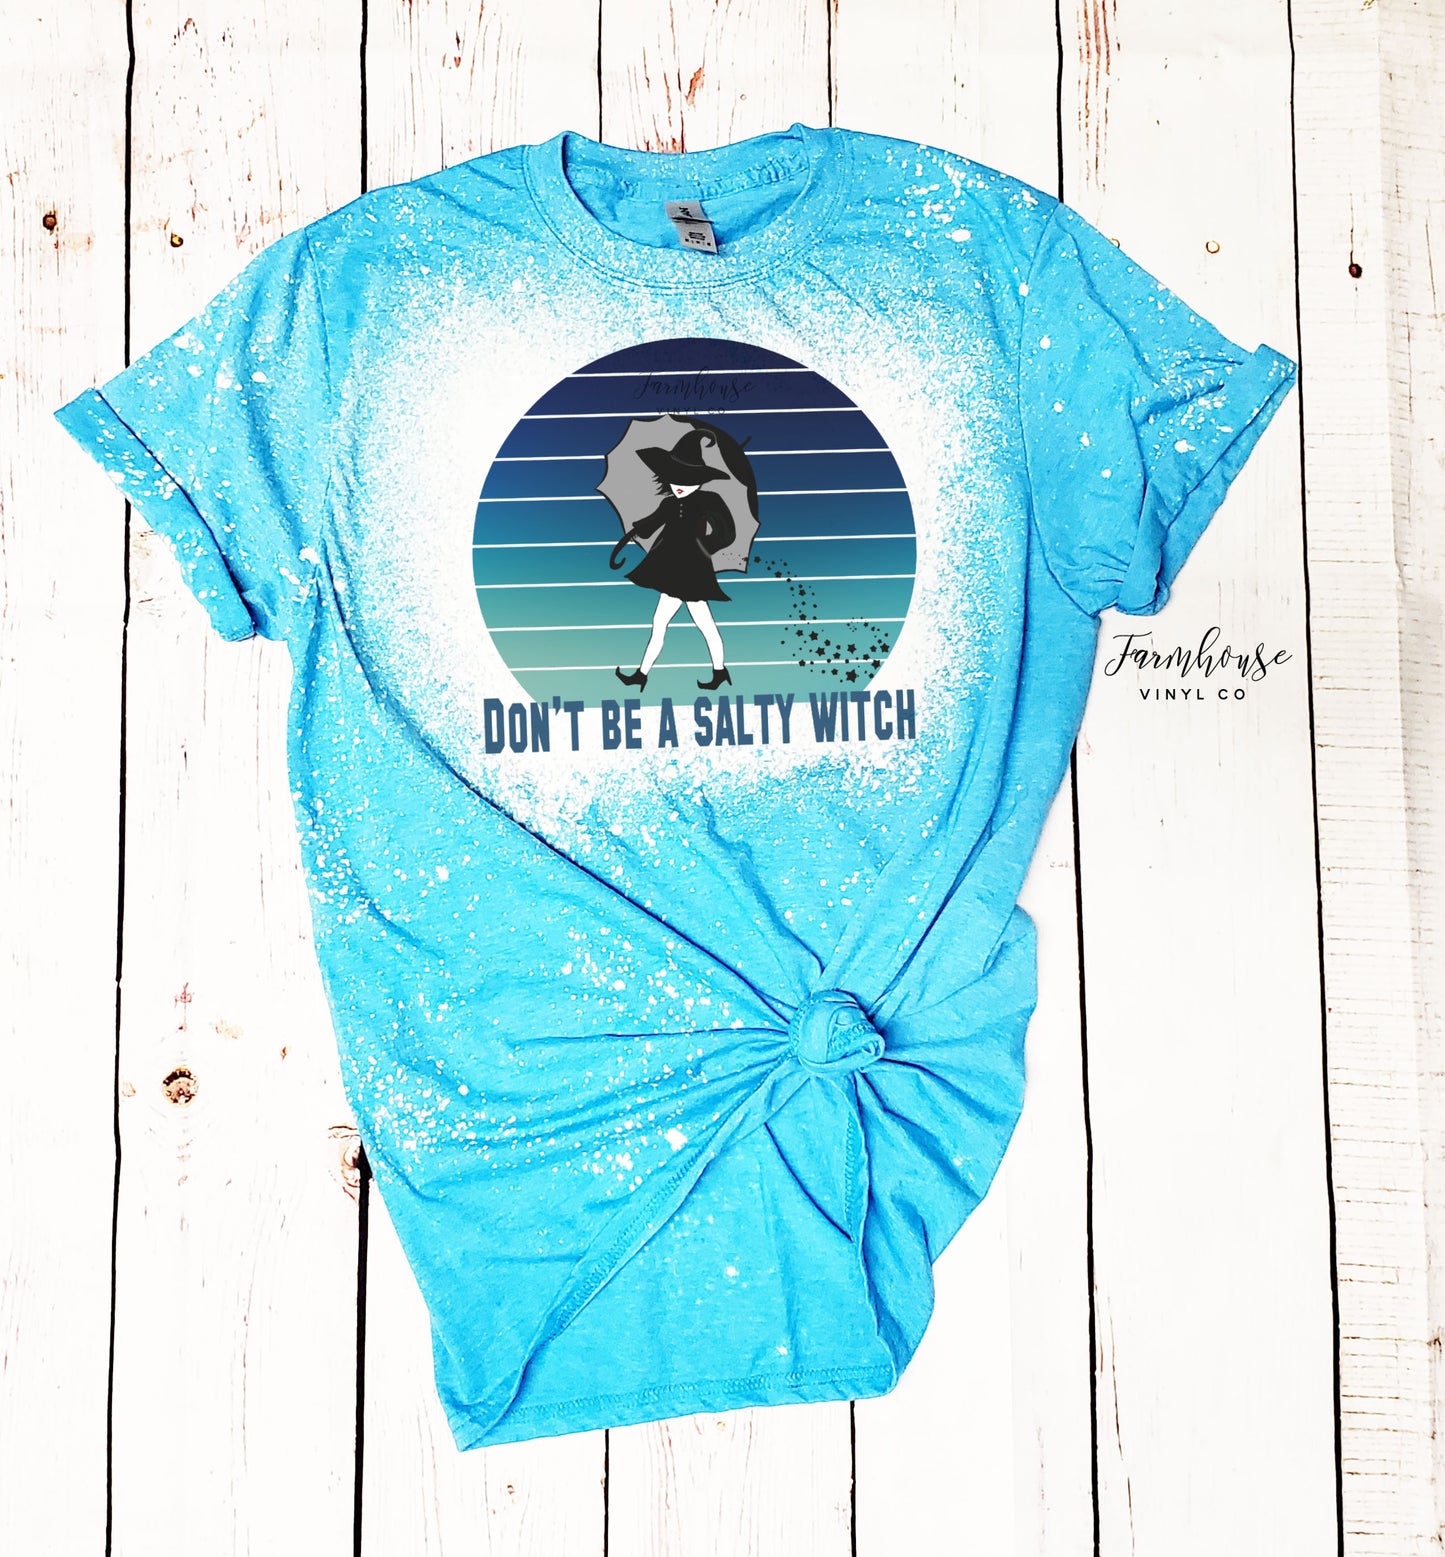 Don't Be A Salty Witch Shirt - Farmhouse Vinyl Co